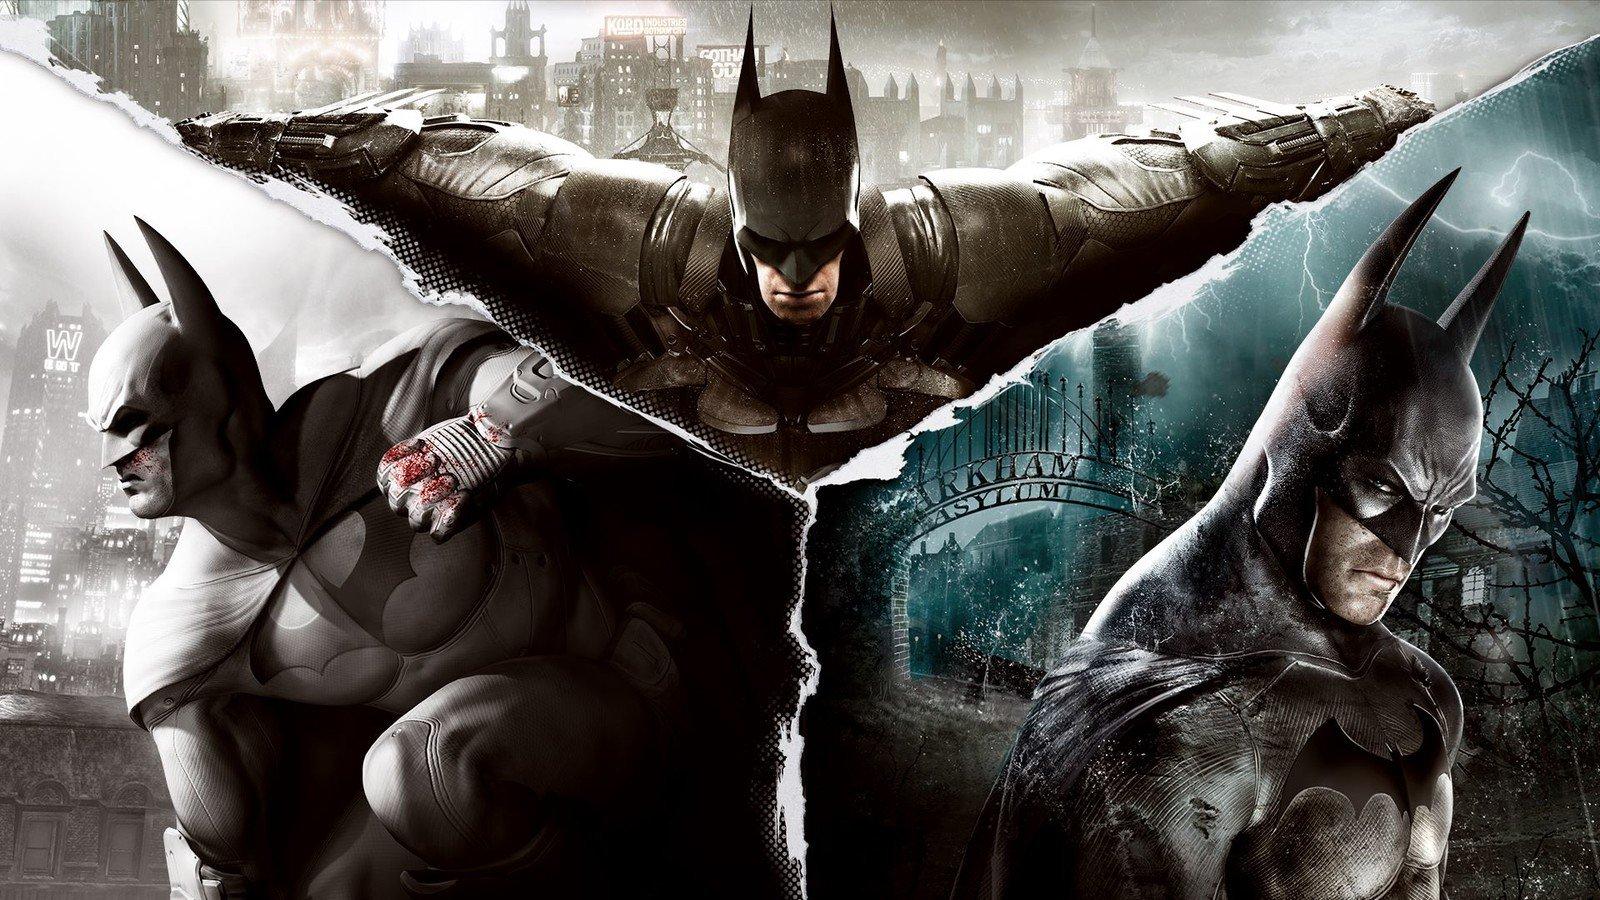 Where to buy the Batman Arkham Collection Steelbook Edition